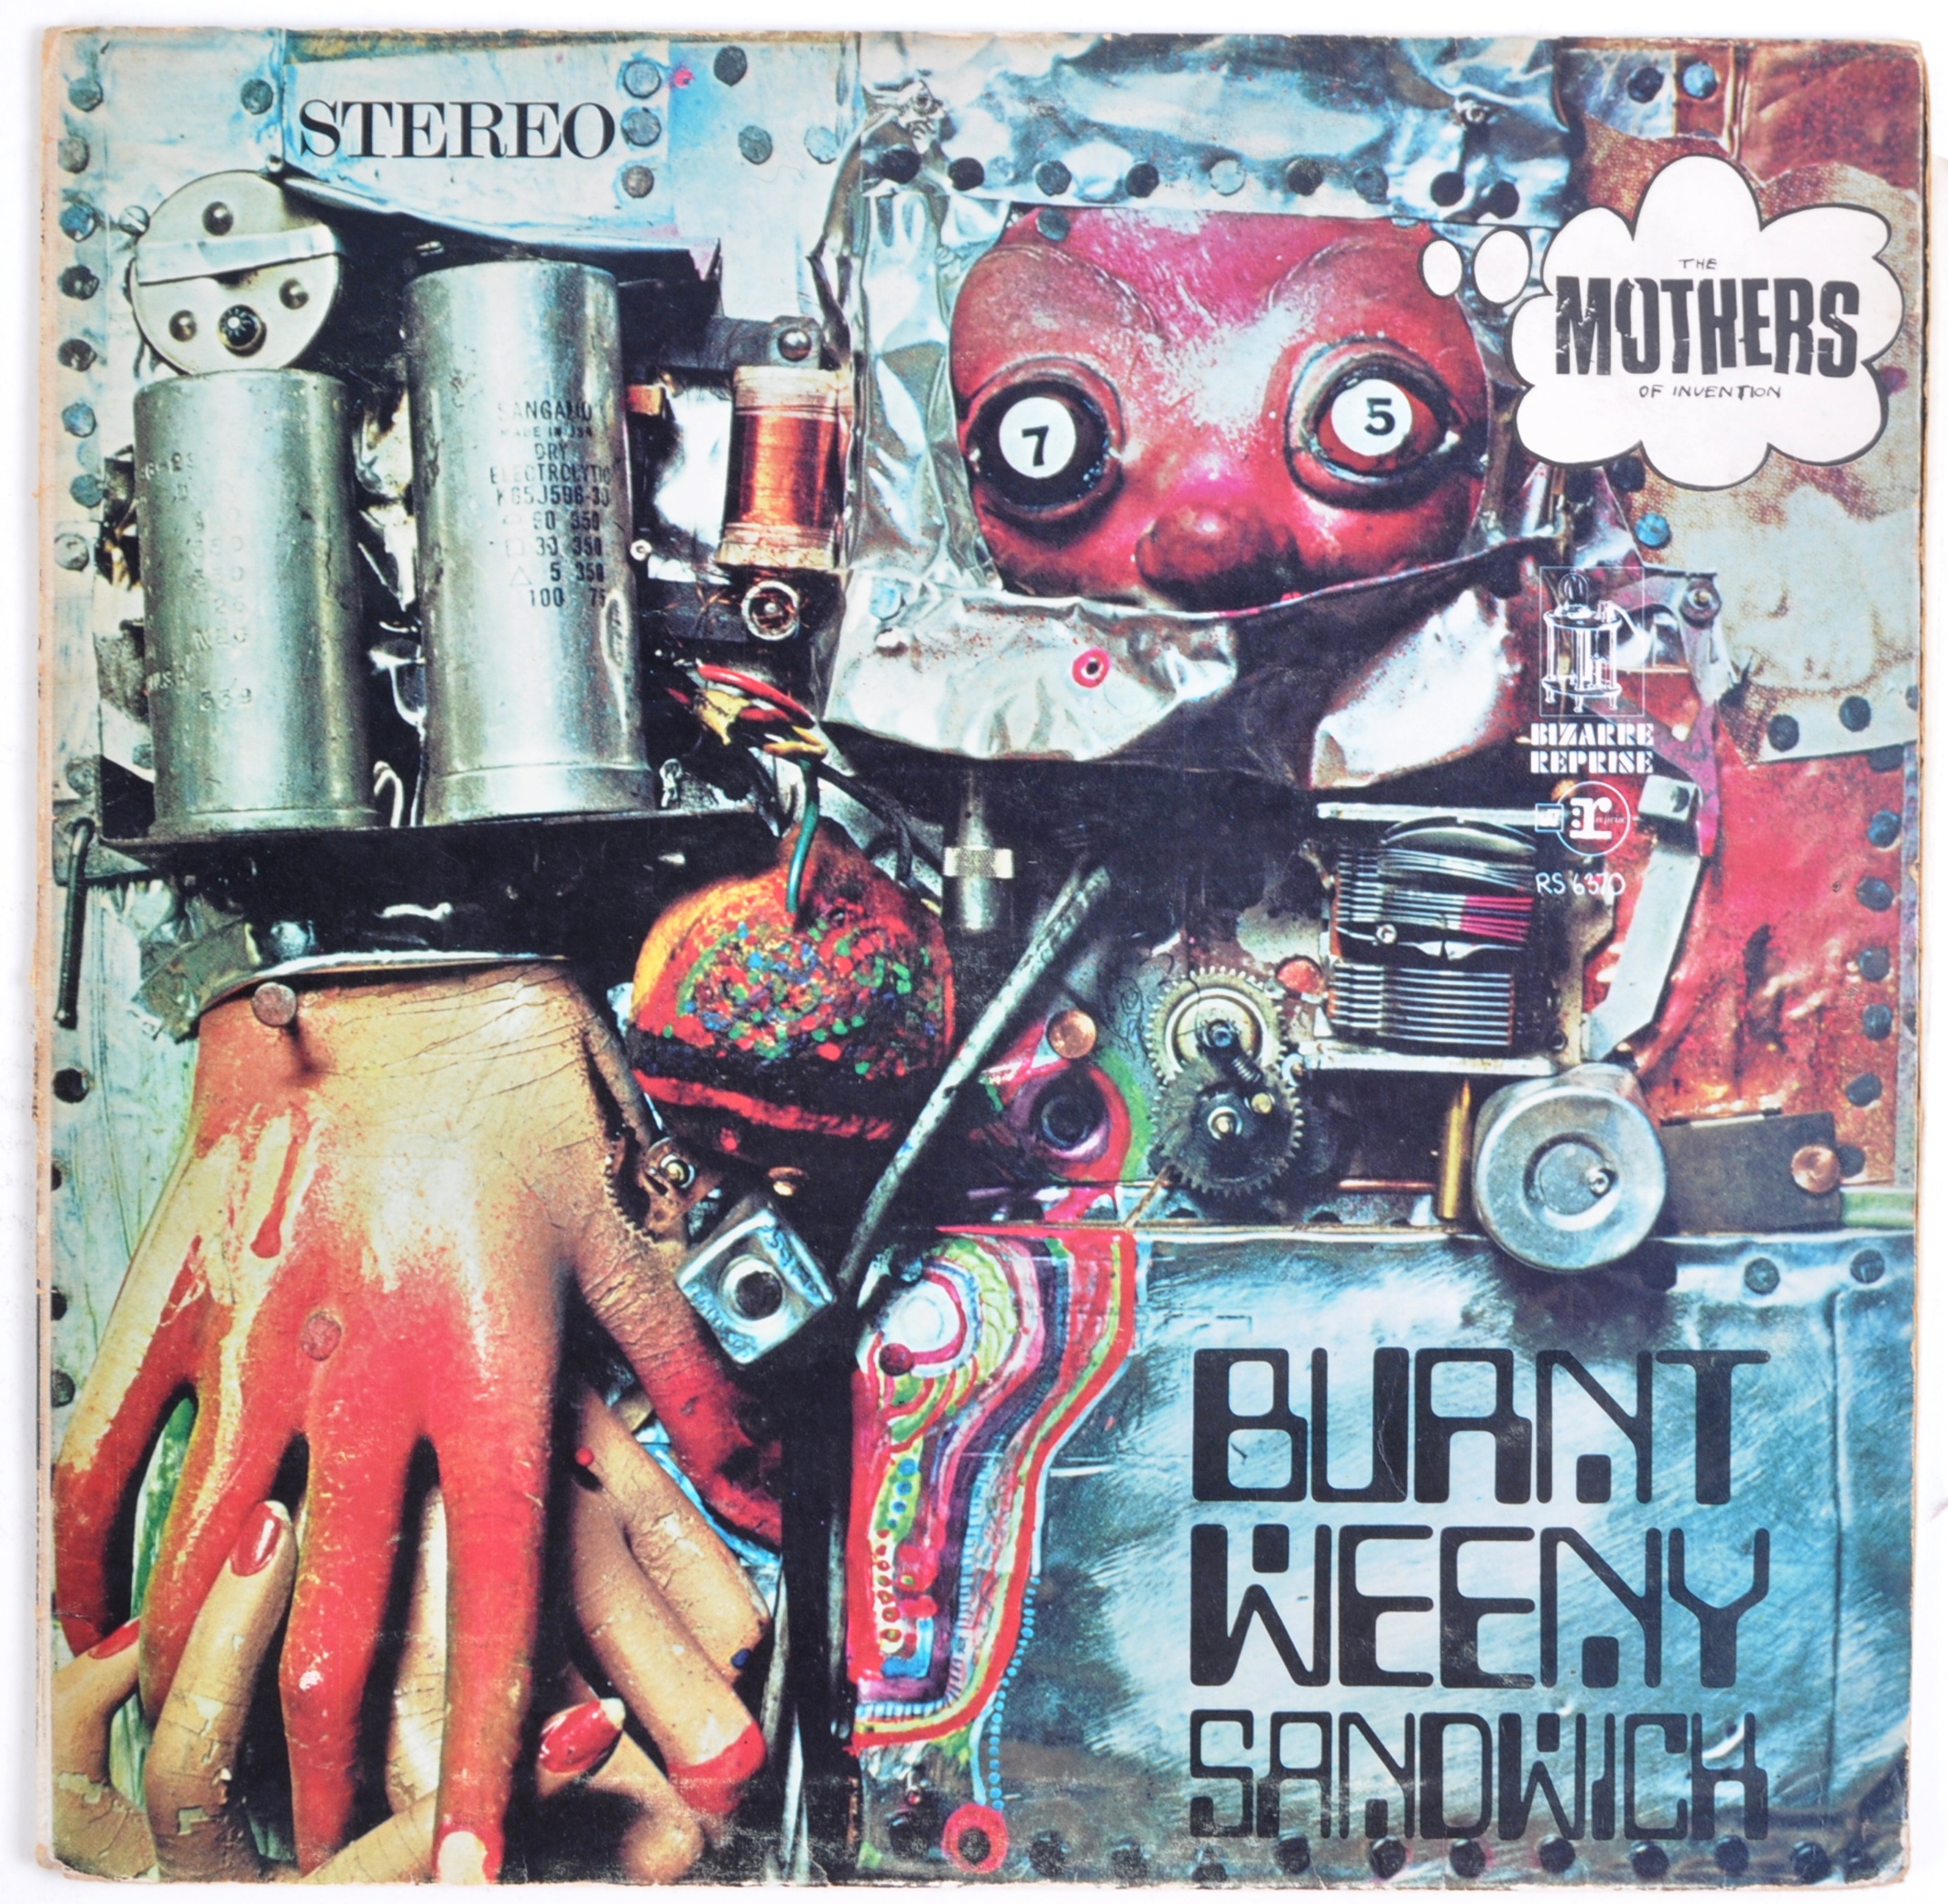 THE MOTHERS OF INVENTION - BURNT WEENY SANDWICH 1ST PRESS